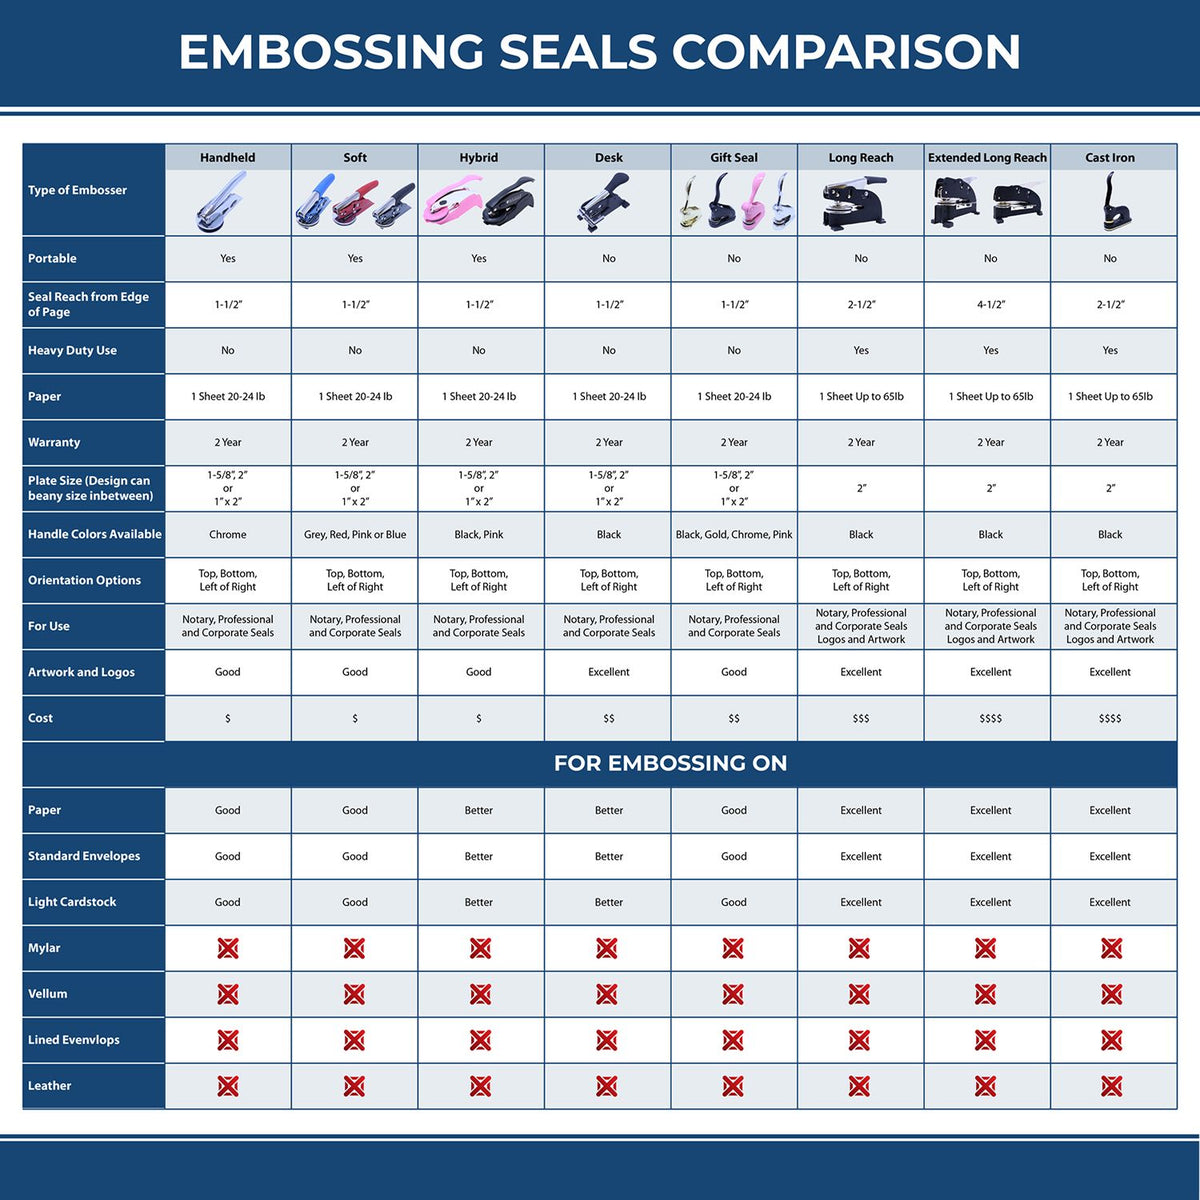 A comparison chart for the different types of mount models available for the Extended Long Reach Hawaii Surveyor Embosser.